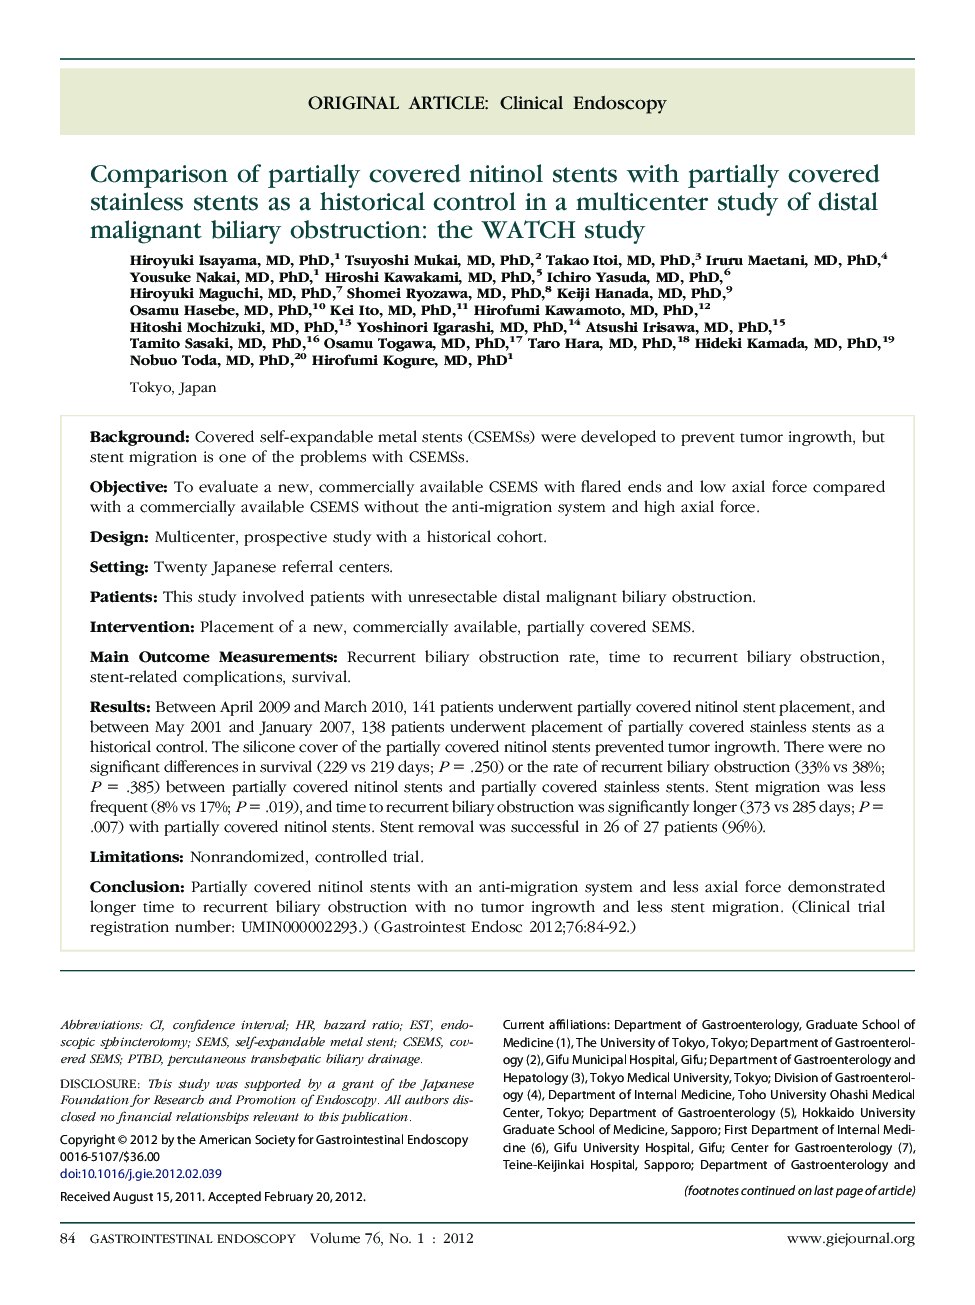 Comparison of partially covered nitinol stents with partially covered stainless stents as a historical control in a multicenter study of distal malignant biliary obstruction: the WATCH study 